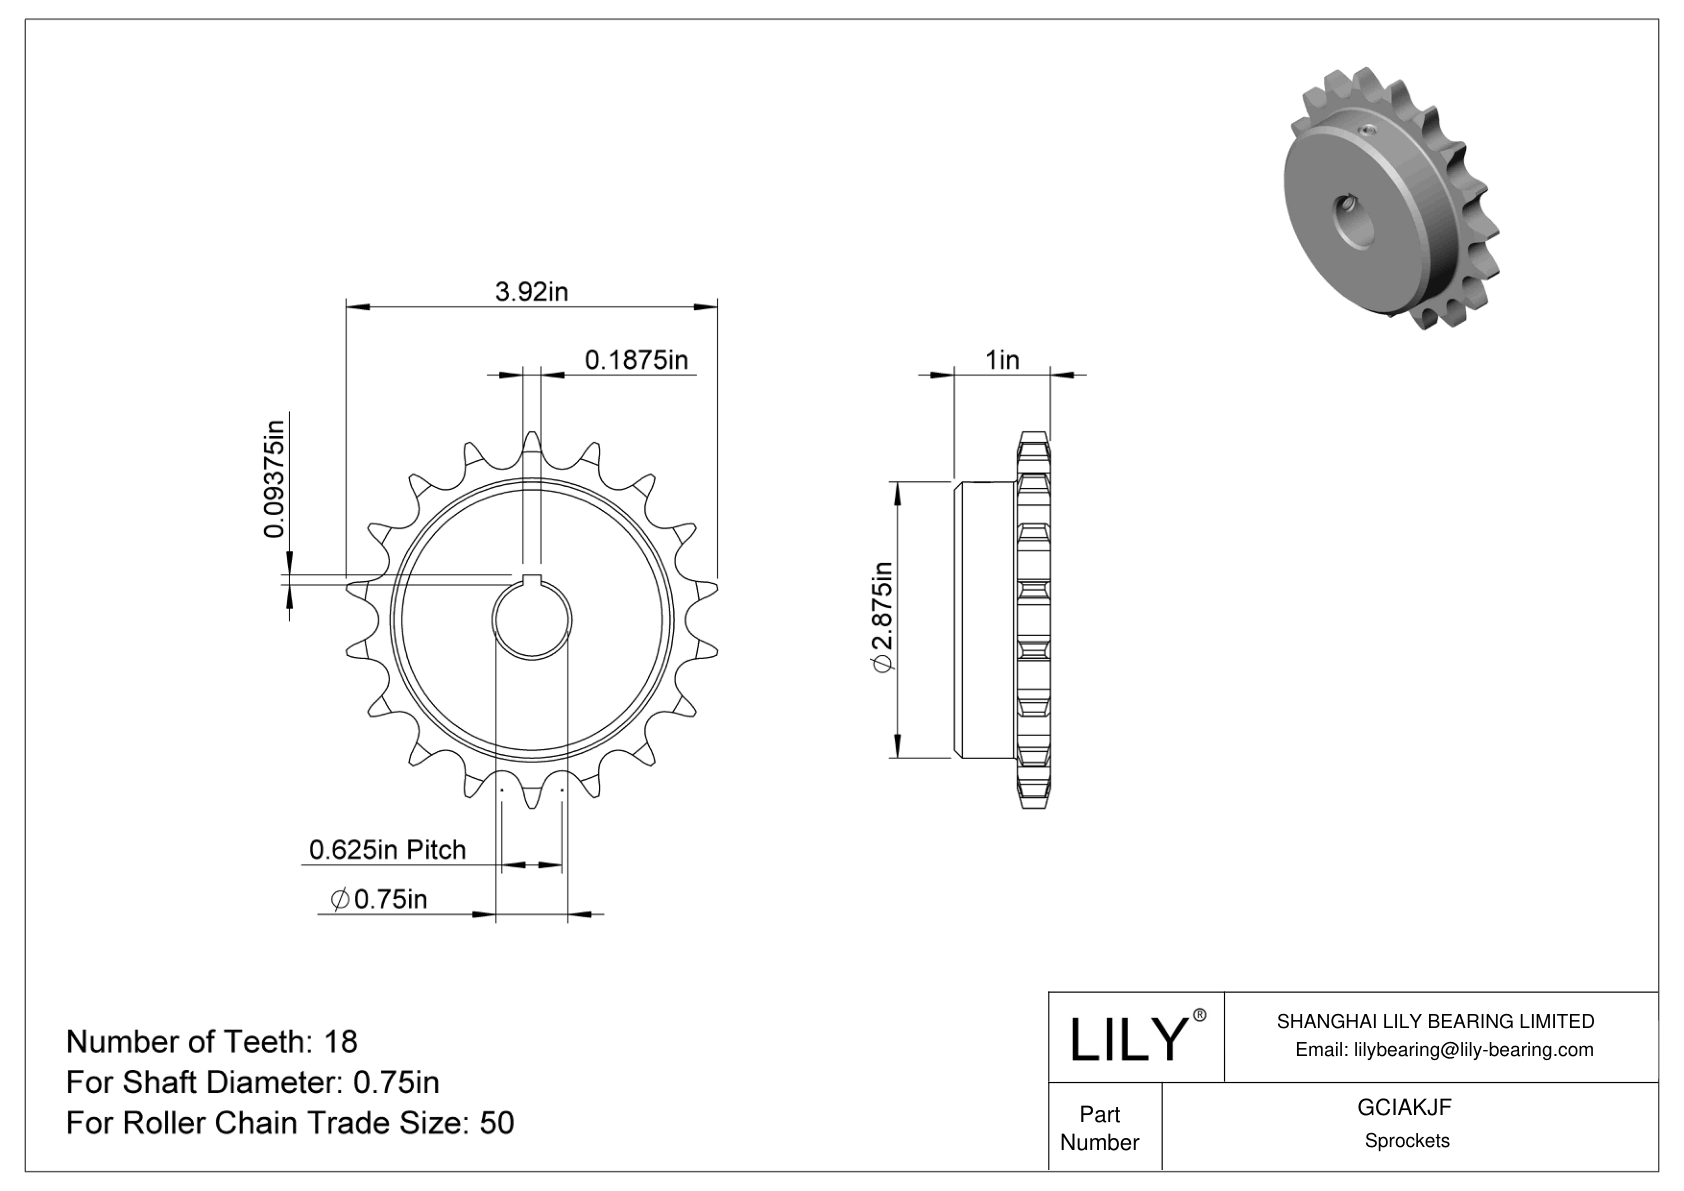 GCIAKJF Sprockets for ANSI Roller Chain cad drawing